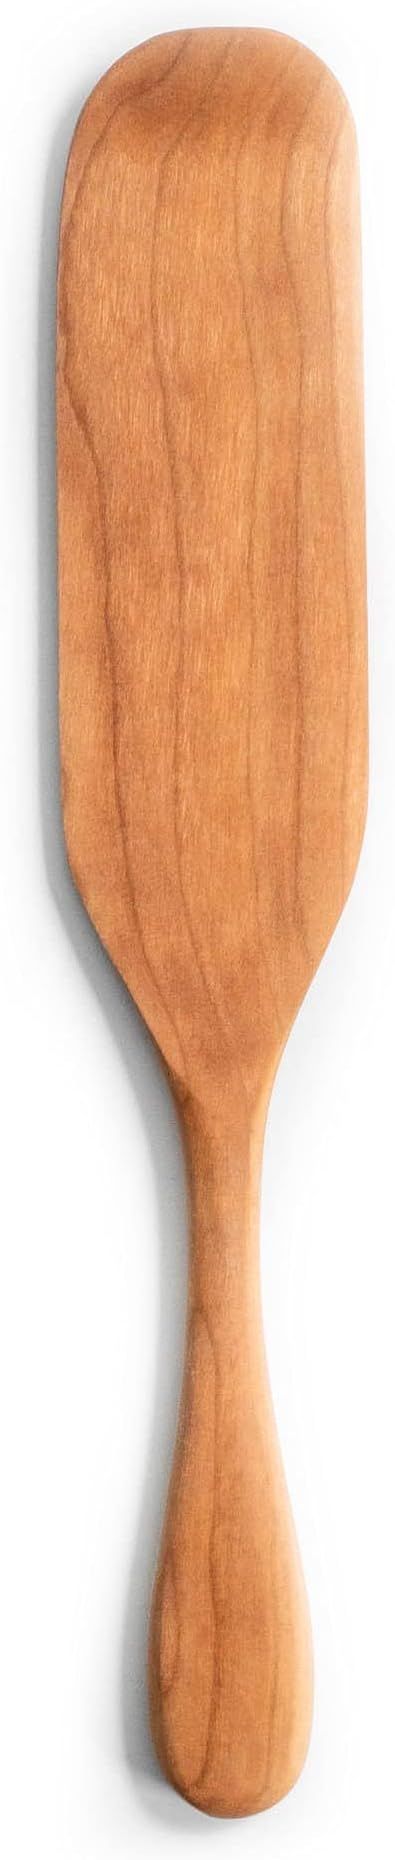 Handmade Wooden Spurtle - 12” Large Stirring Utensil Made from Black Cherry in the USA - Spurtl... | Amazon (US)